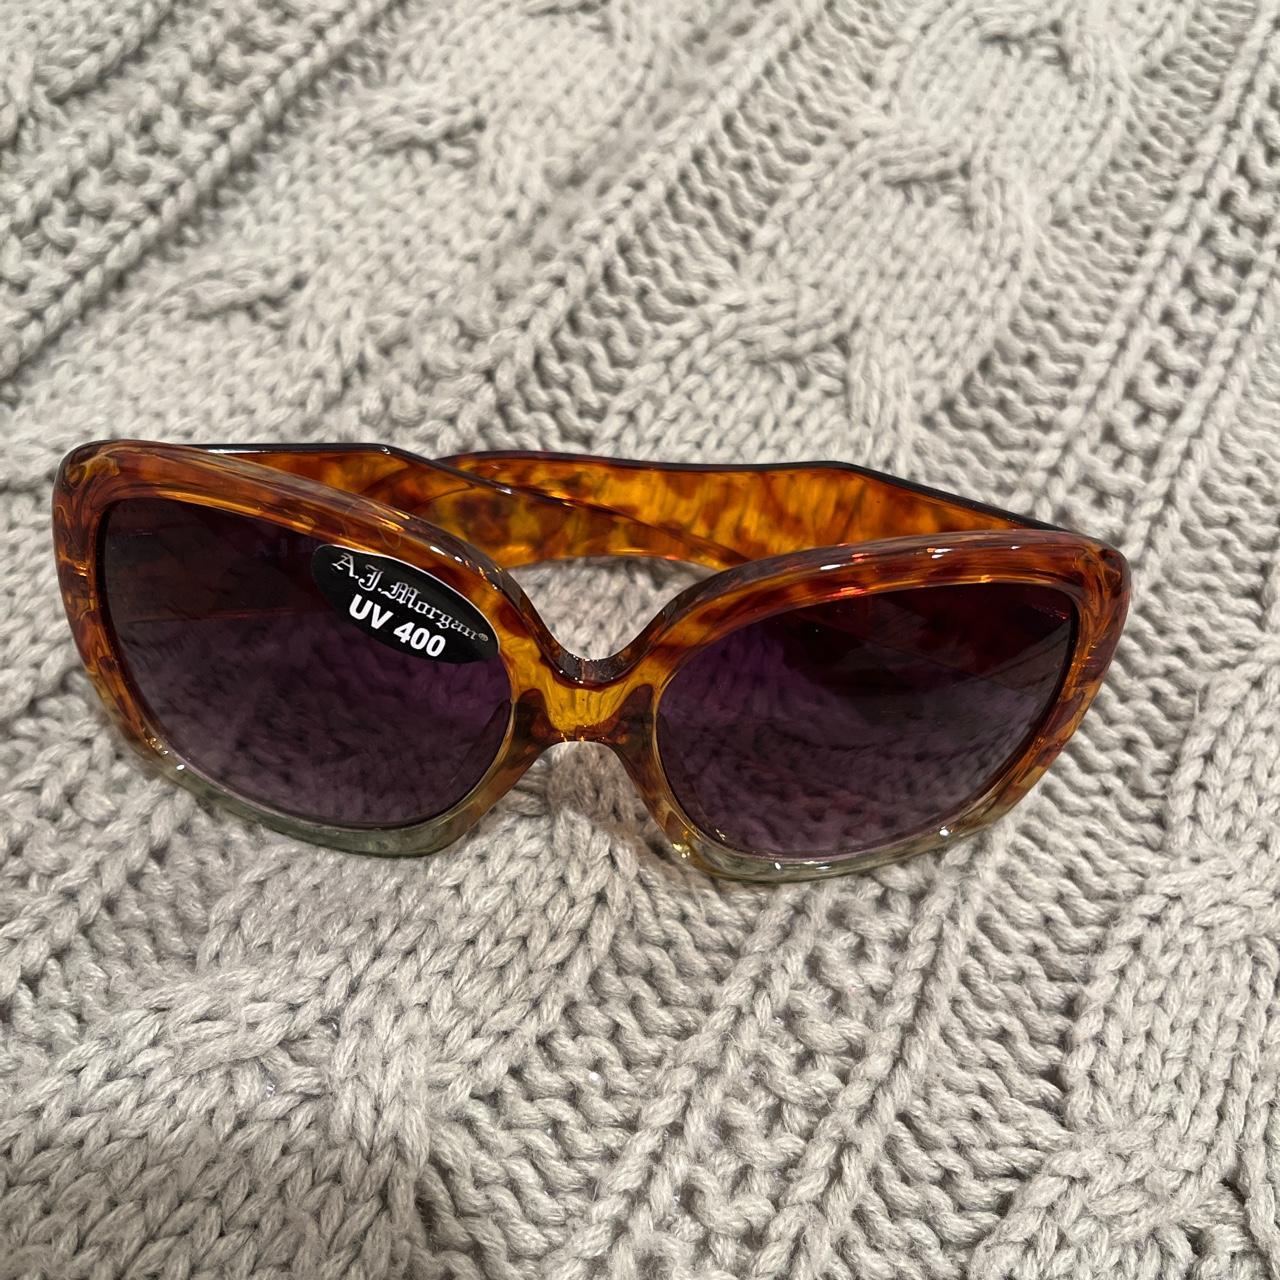 Product Image 4 - Unworn, 400 UV protection clunky